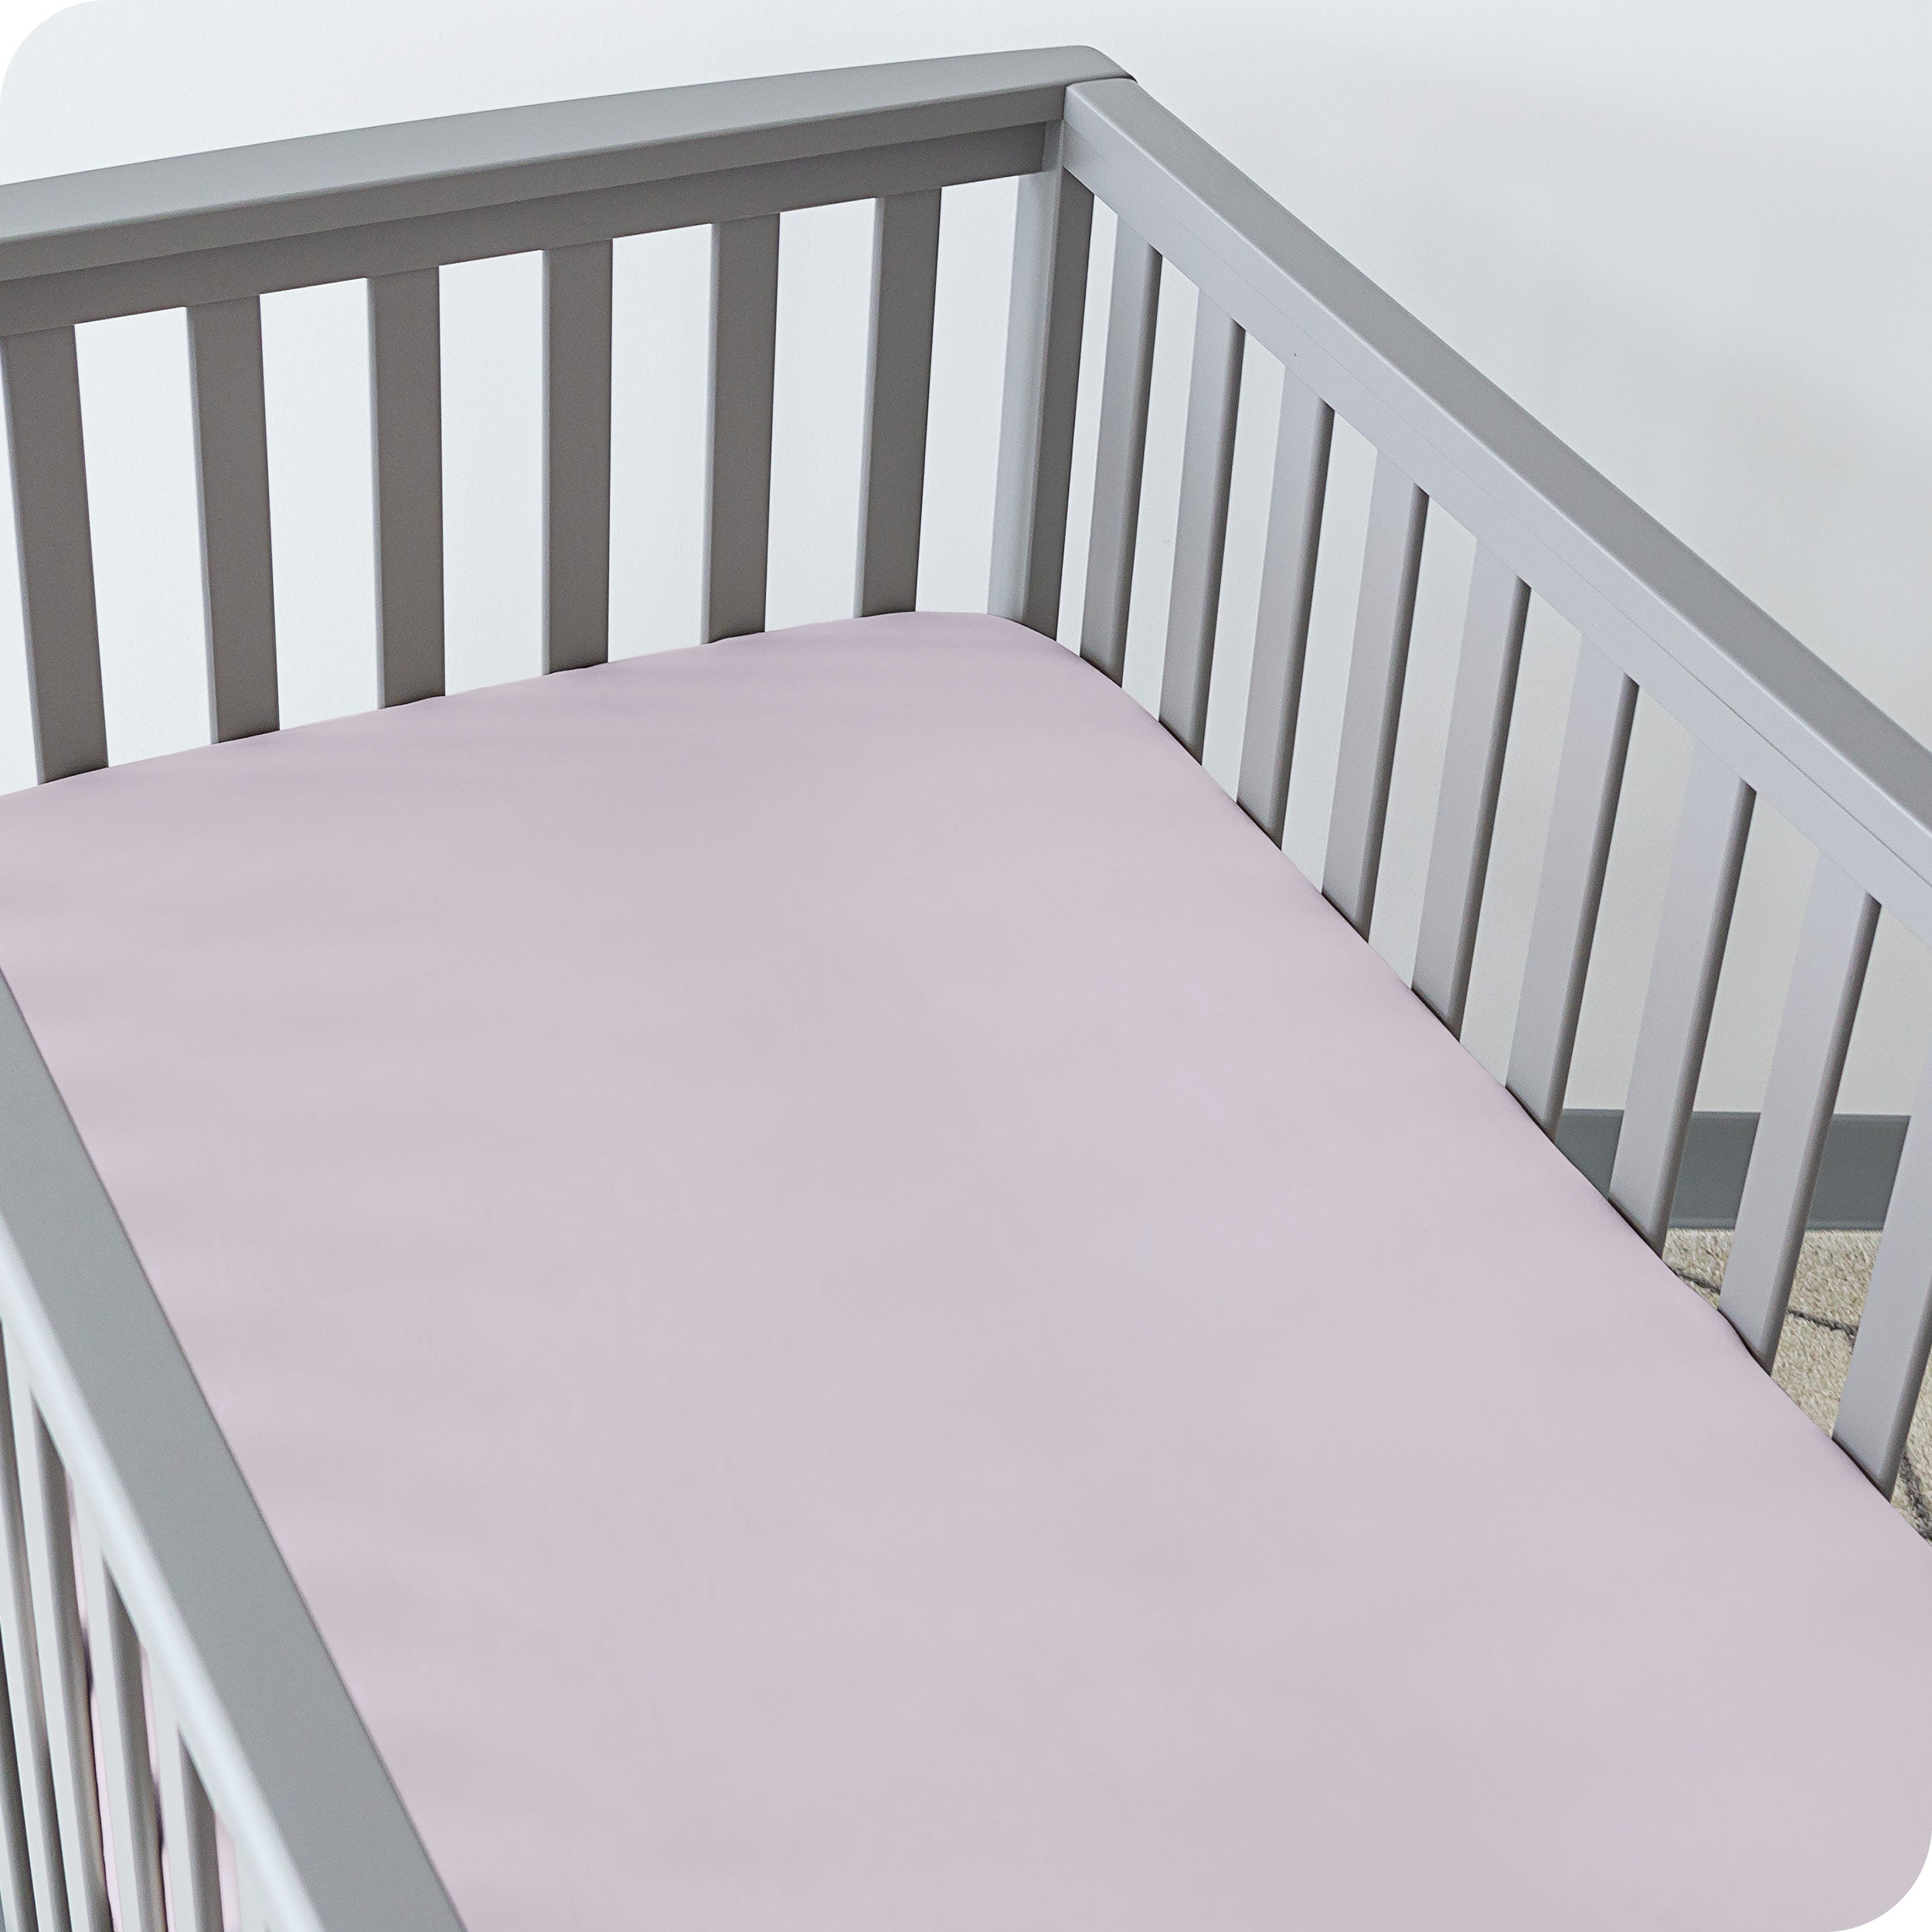 A crib with a fitted sheet on the mattress